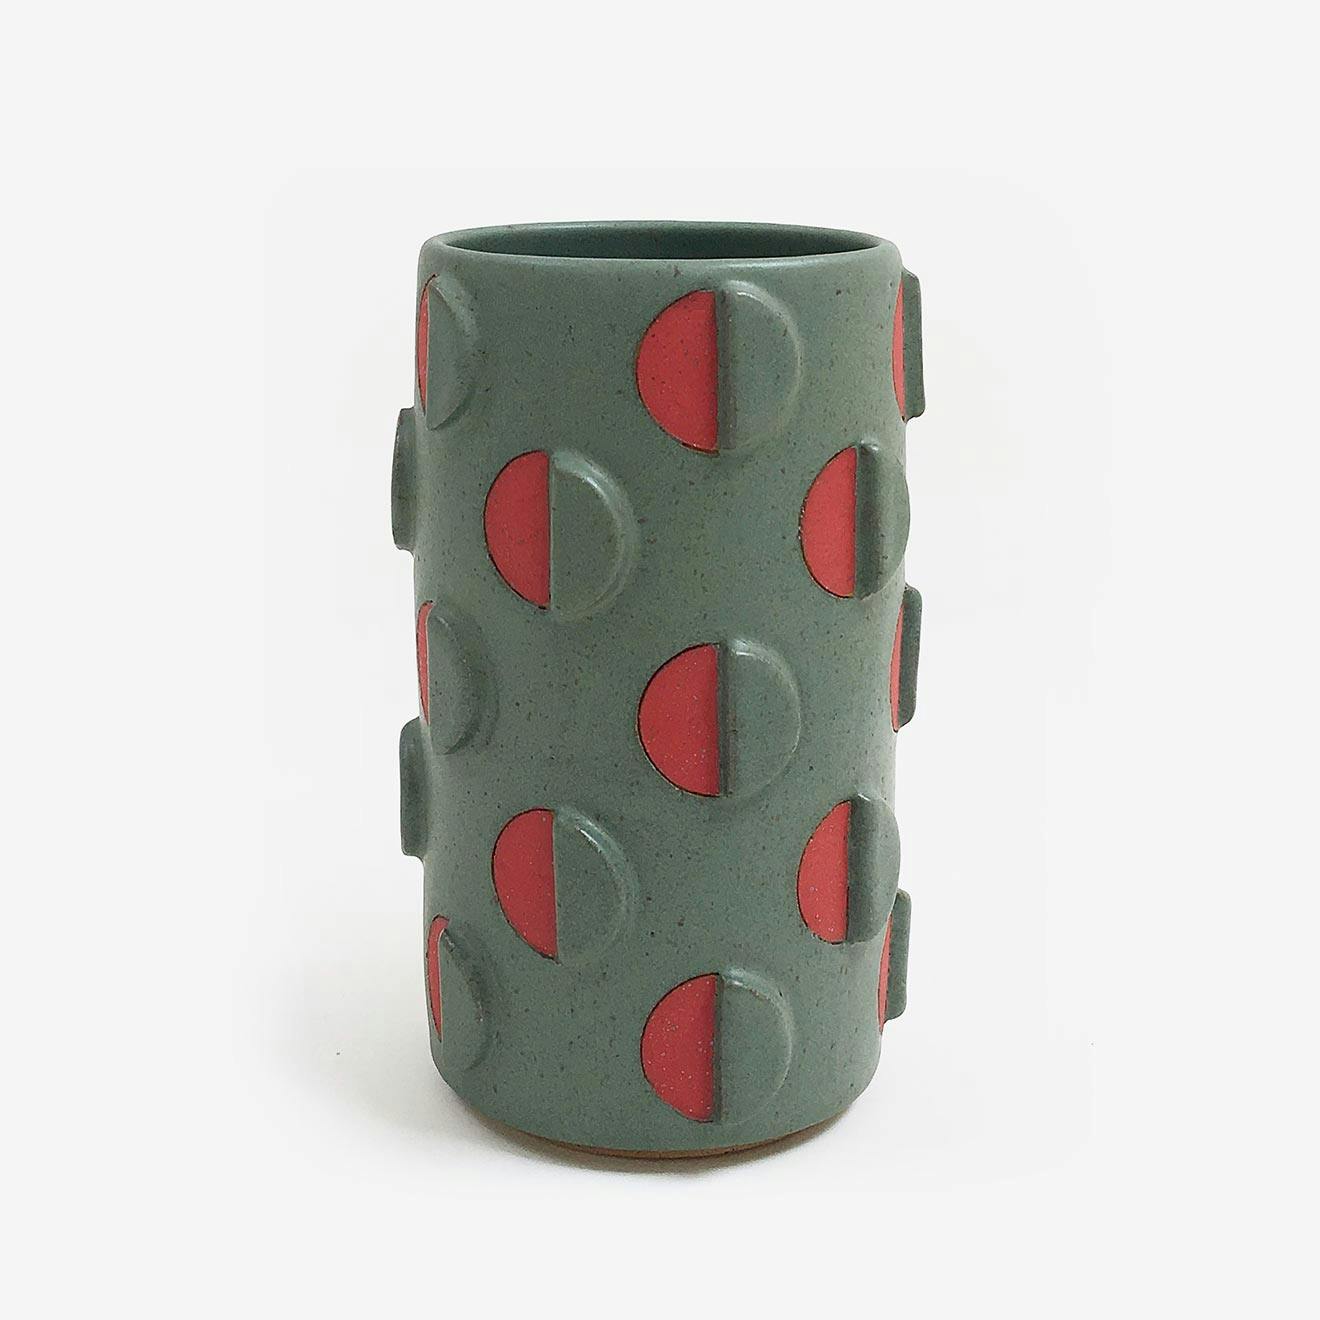 Sculpture by Matthew Ward titled "Split Polka Dot Vase with Relief".